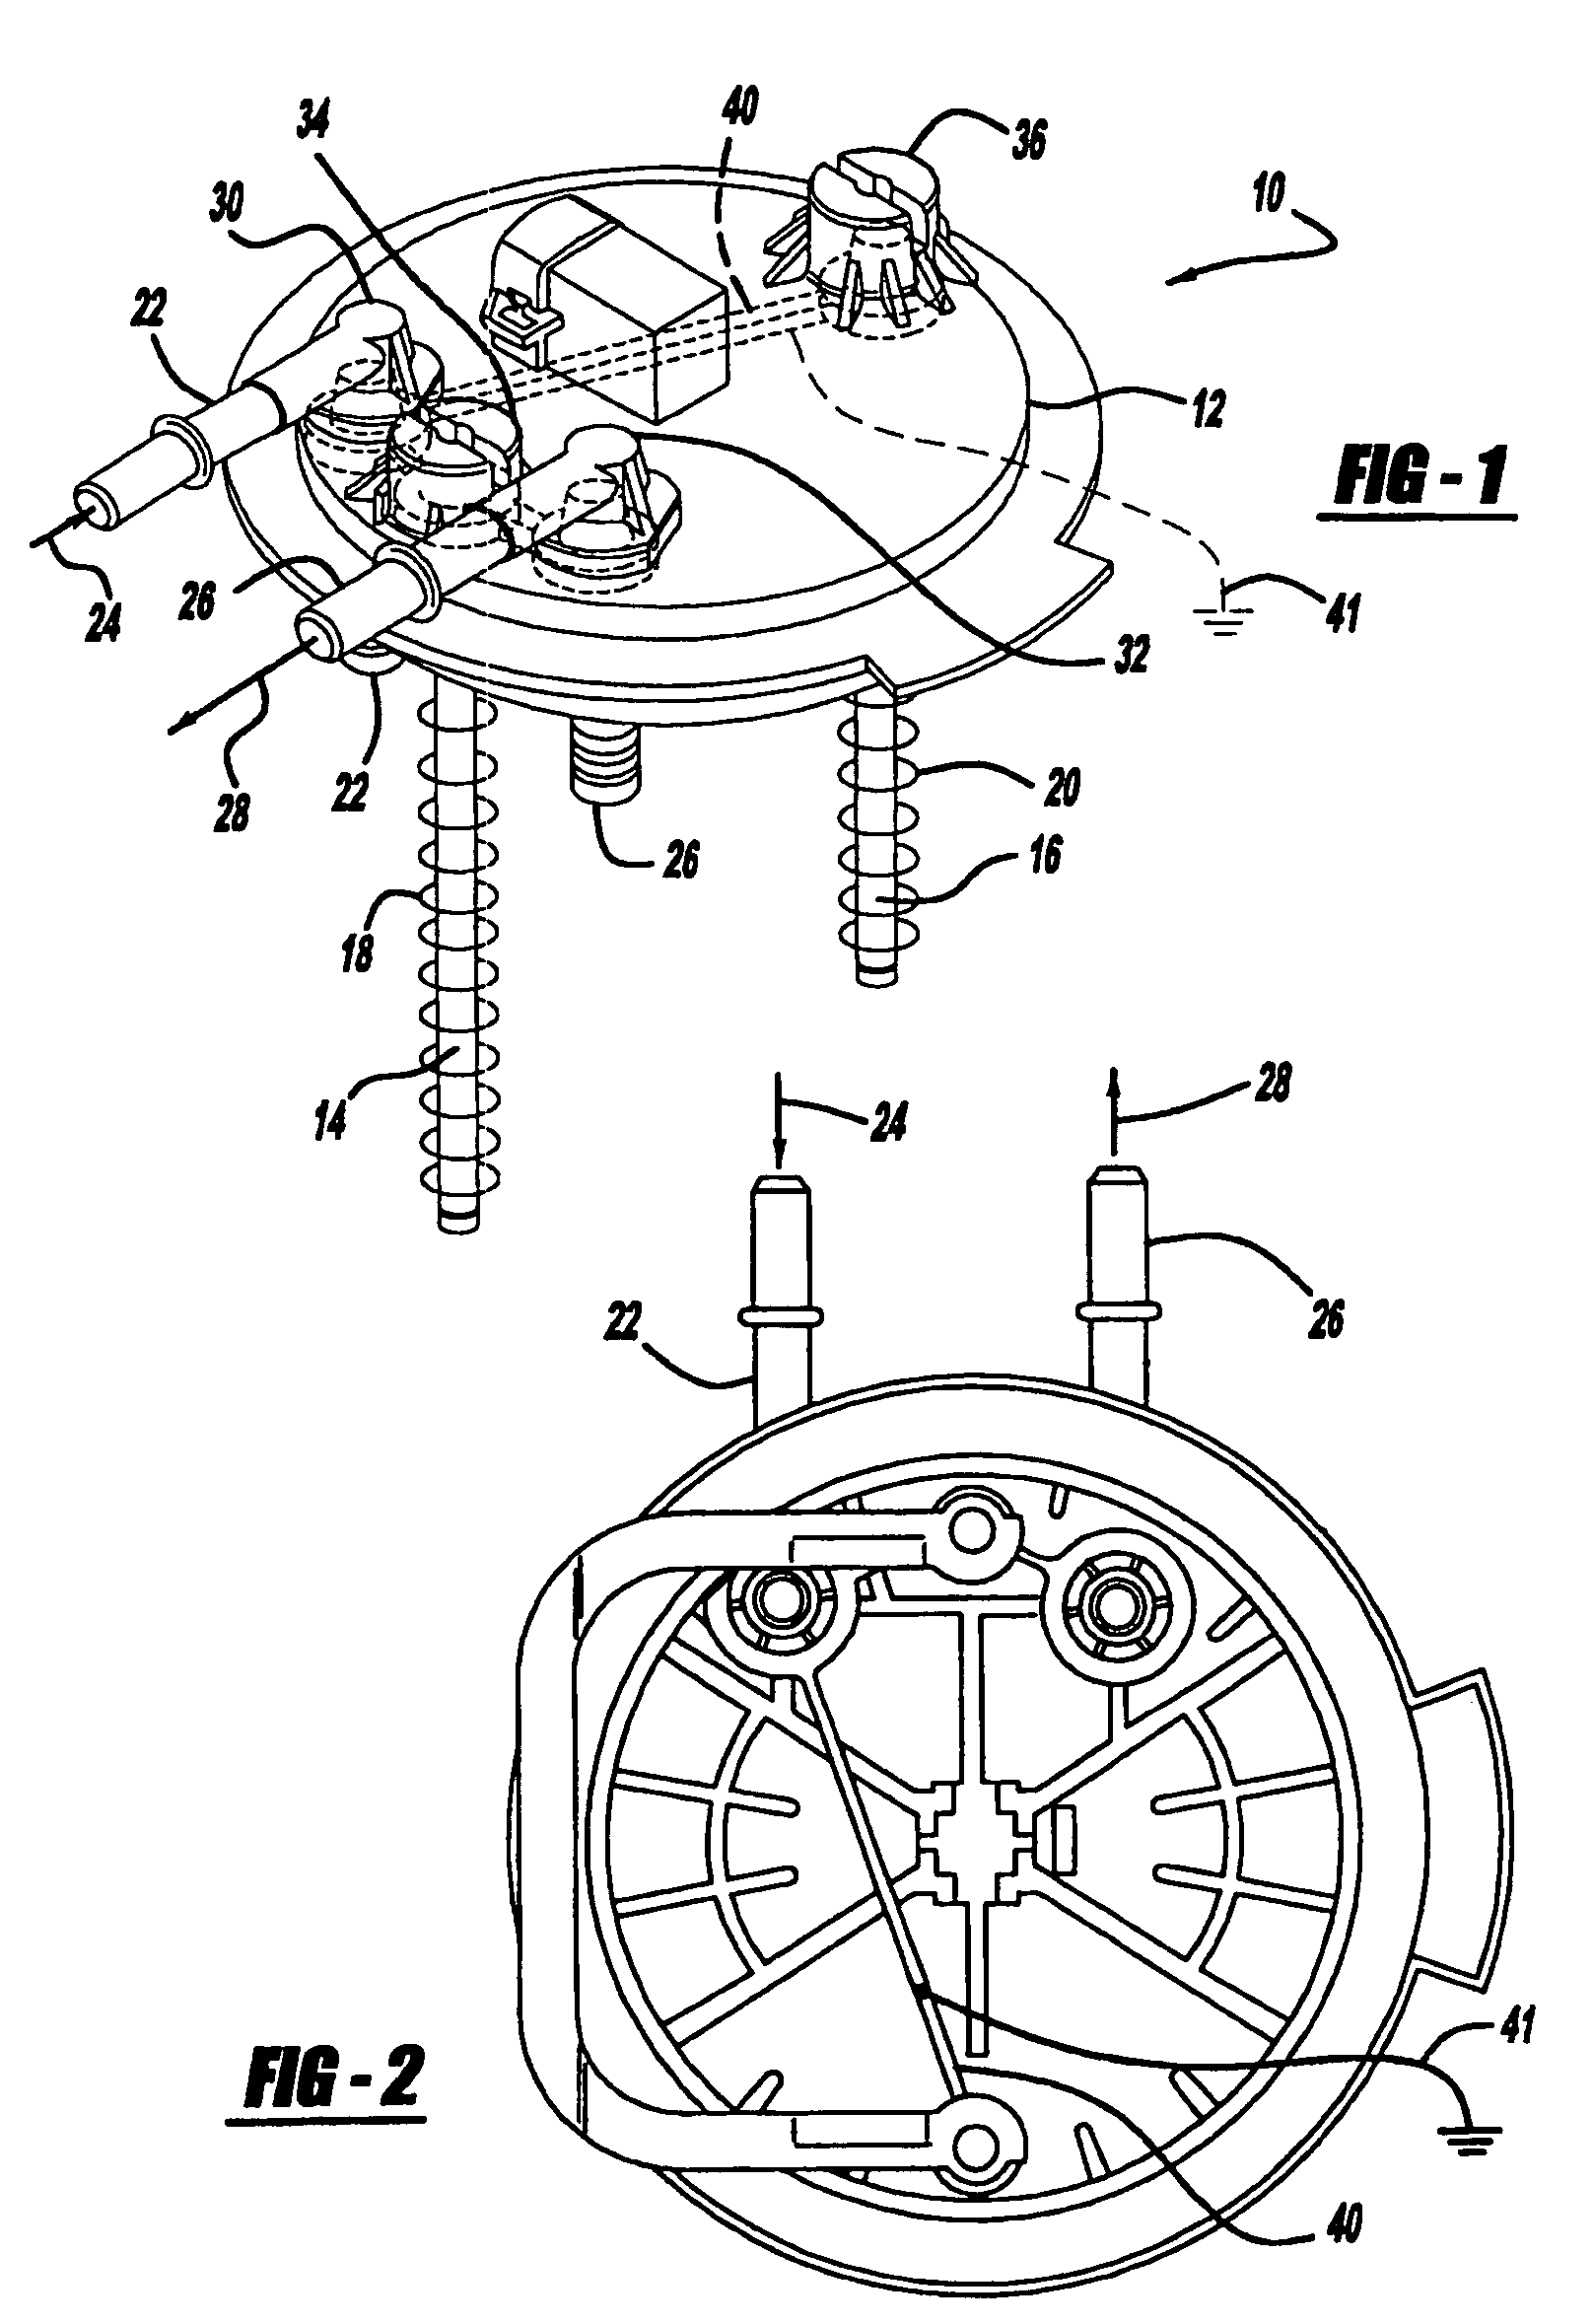 Multi-point grounding plate for fuel pump module